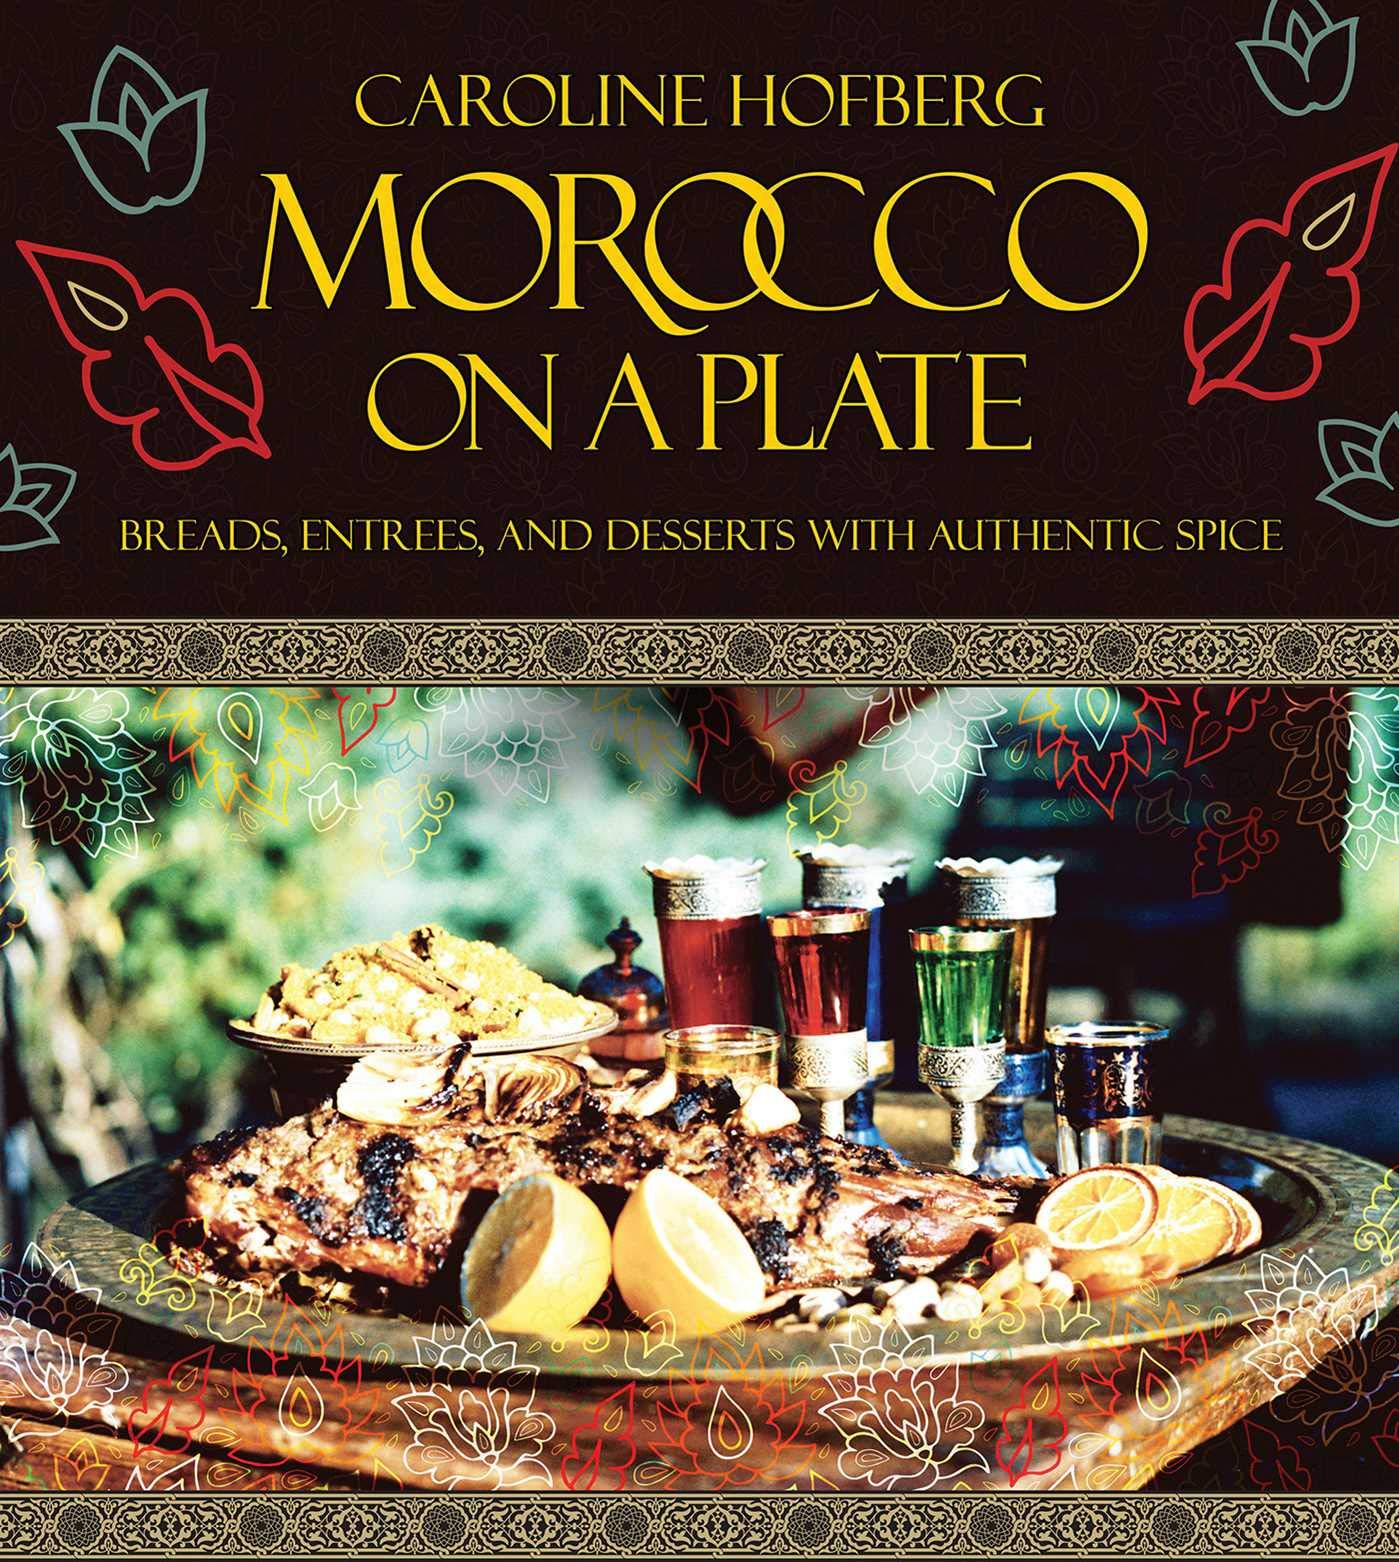 Morocco on a Plate: Breads, Entrees, and Desserts with Authentic Spice (Caroline Hofberg